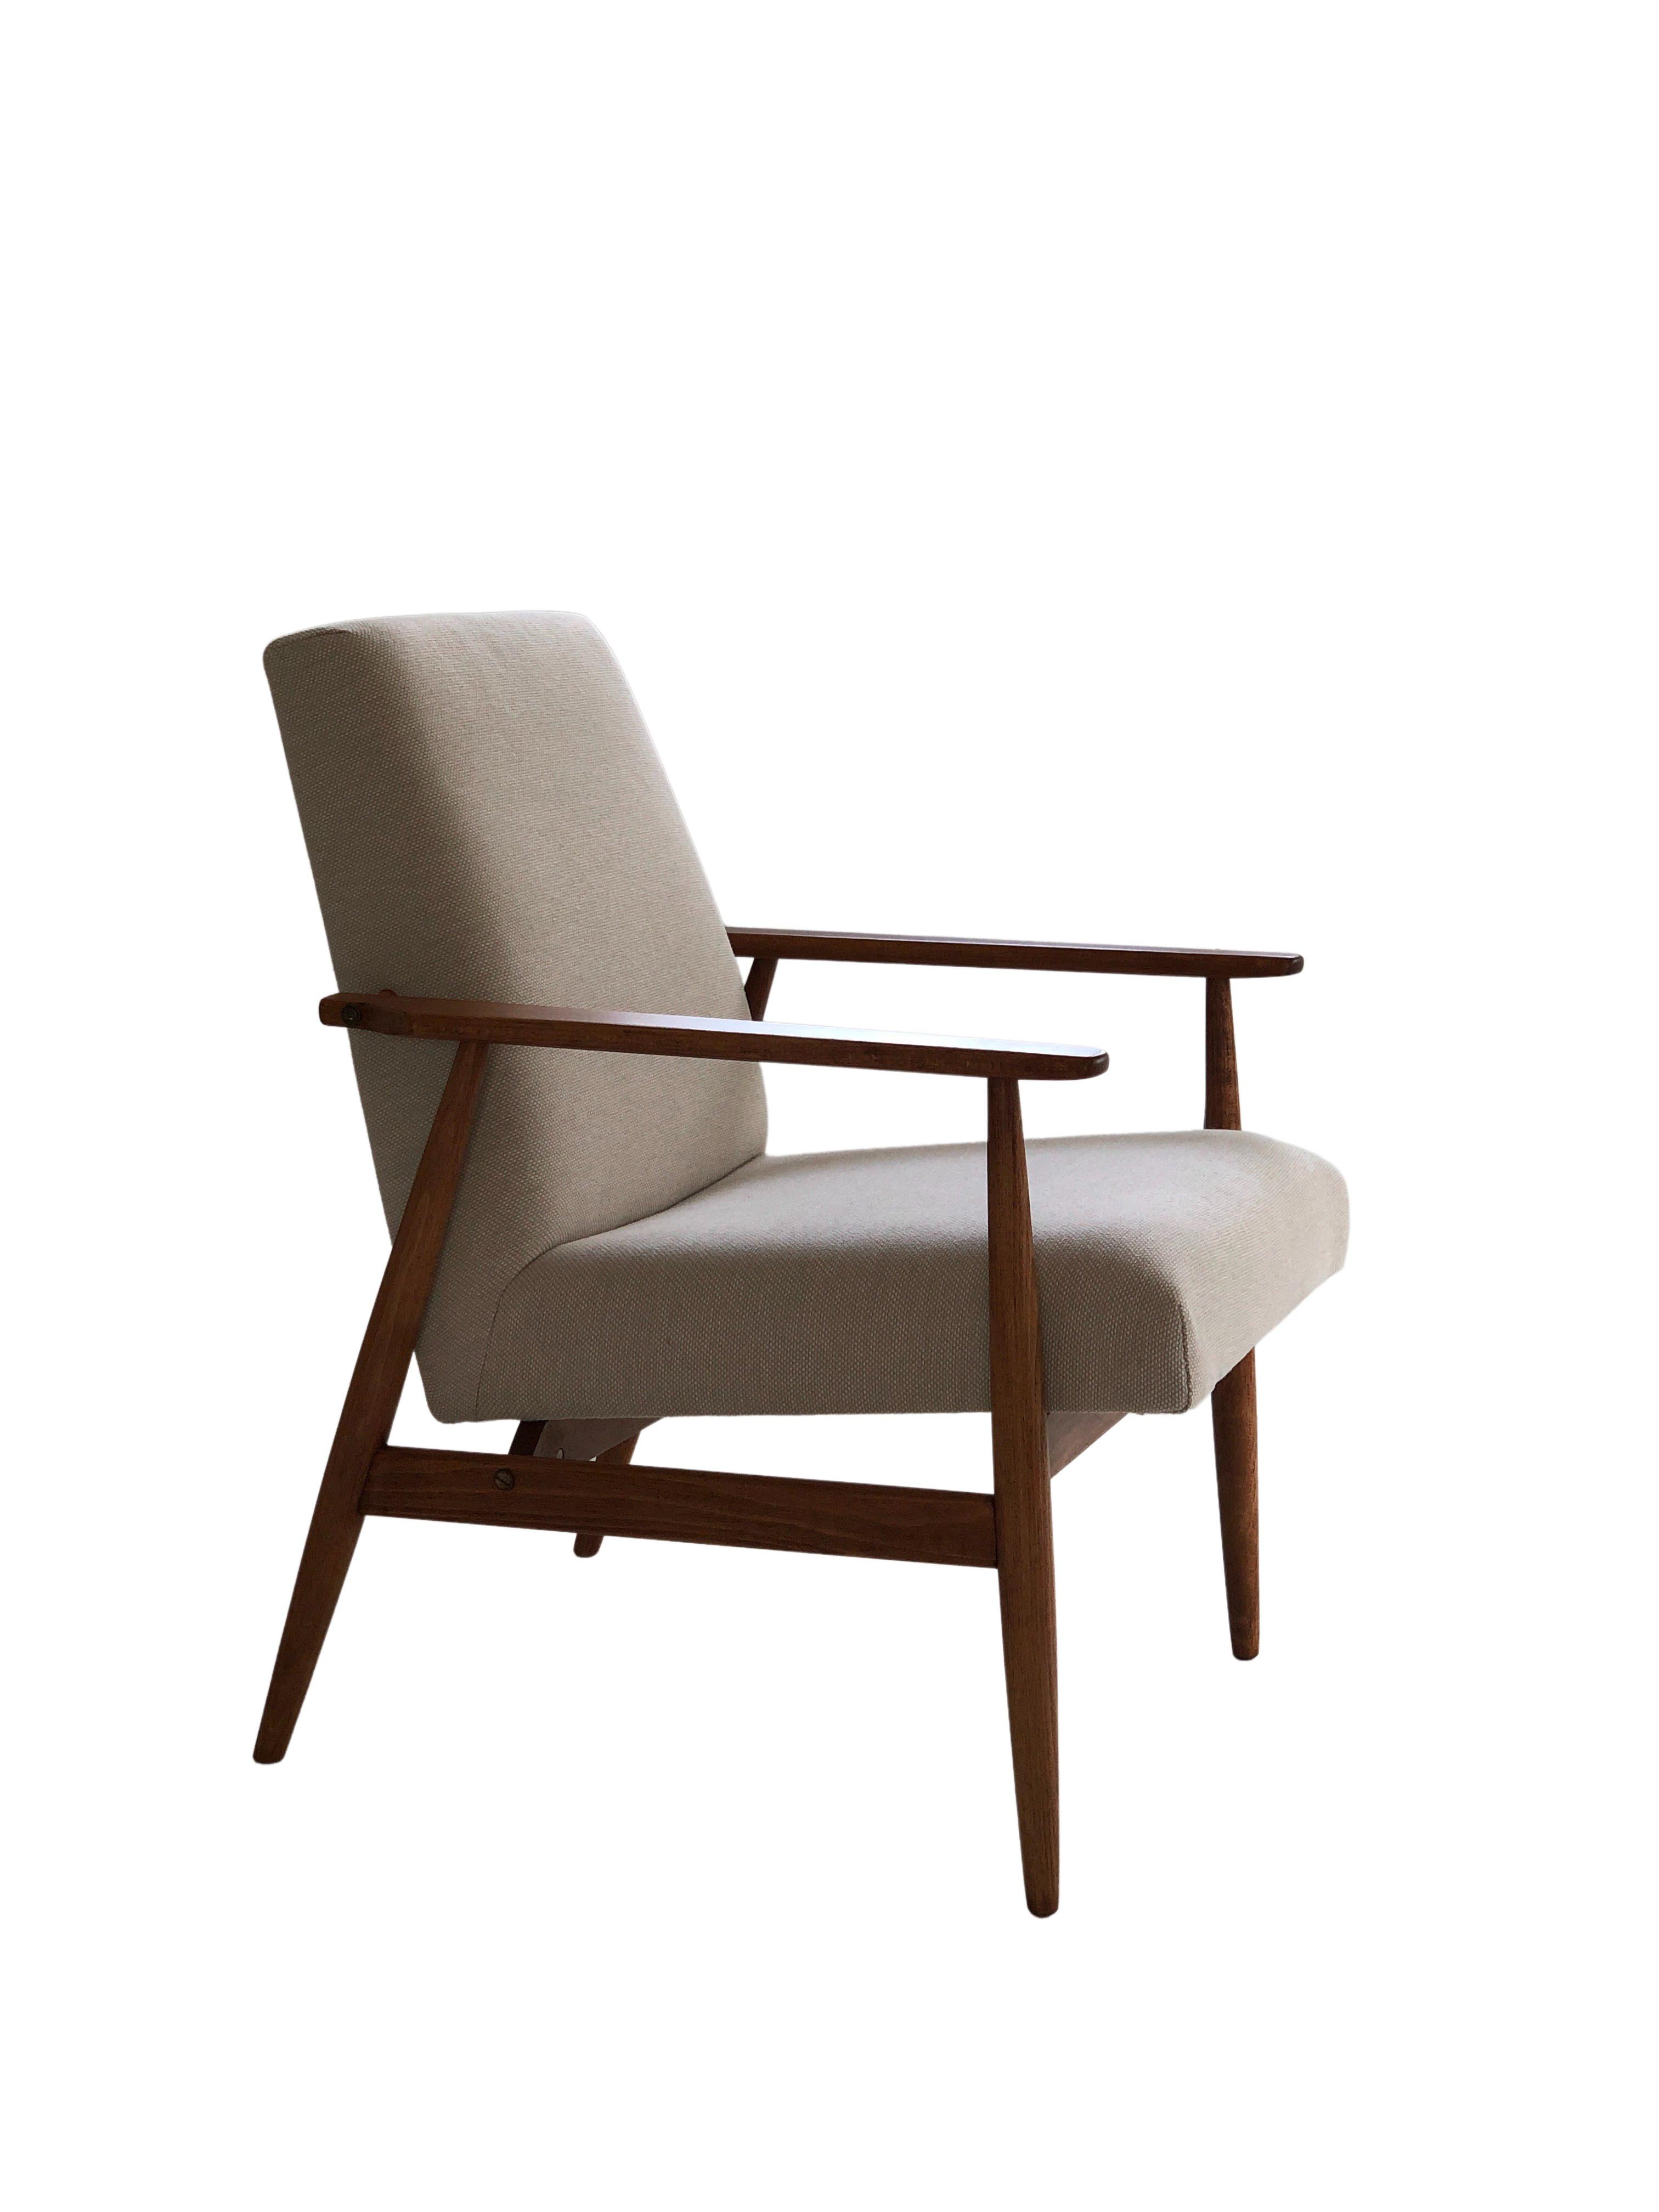 Mid-Century Modern Midcentury Armchair by Henryk Lis in Beige Cotton Linen Upholstery, 1960s For Sale